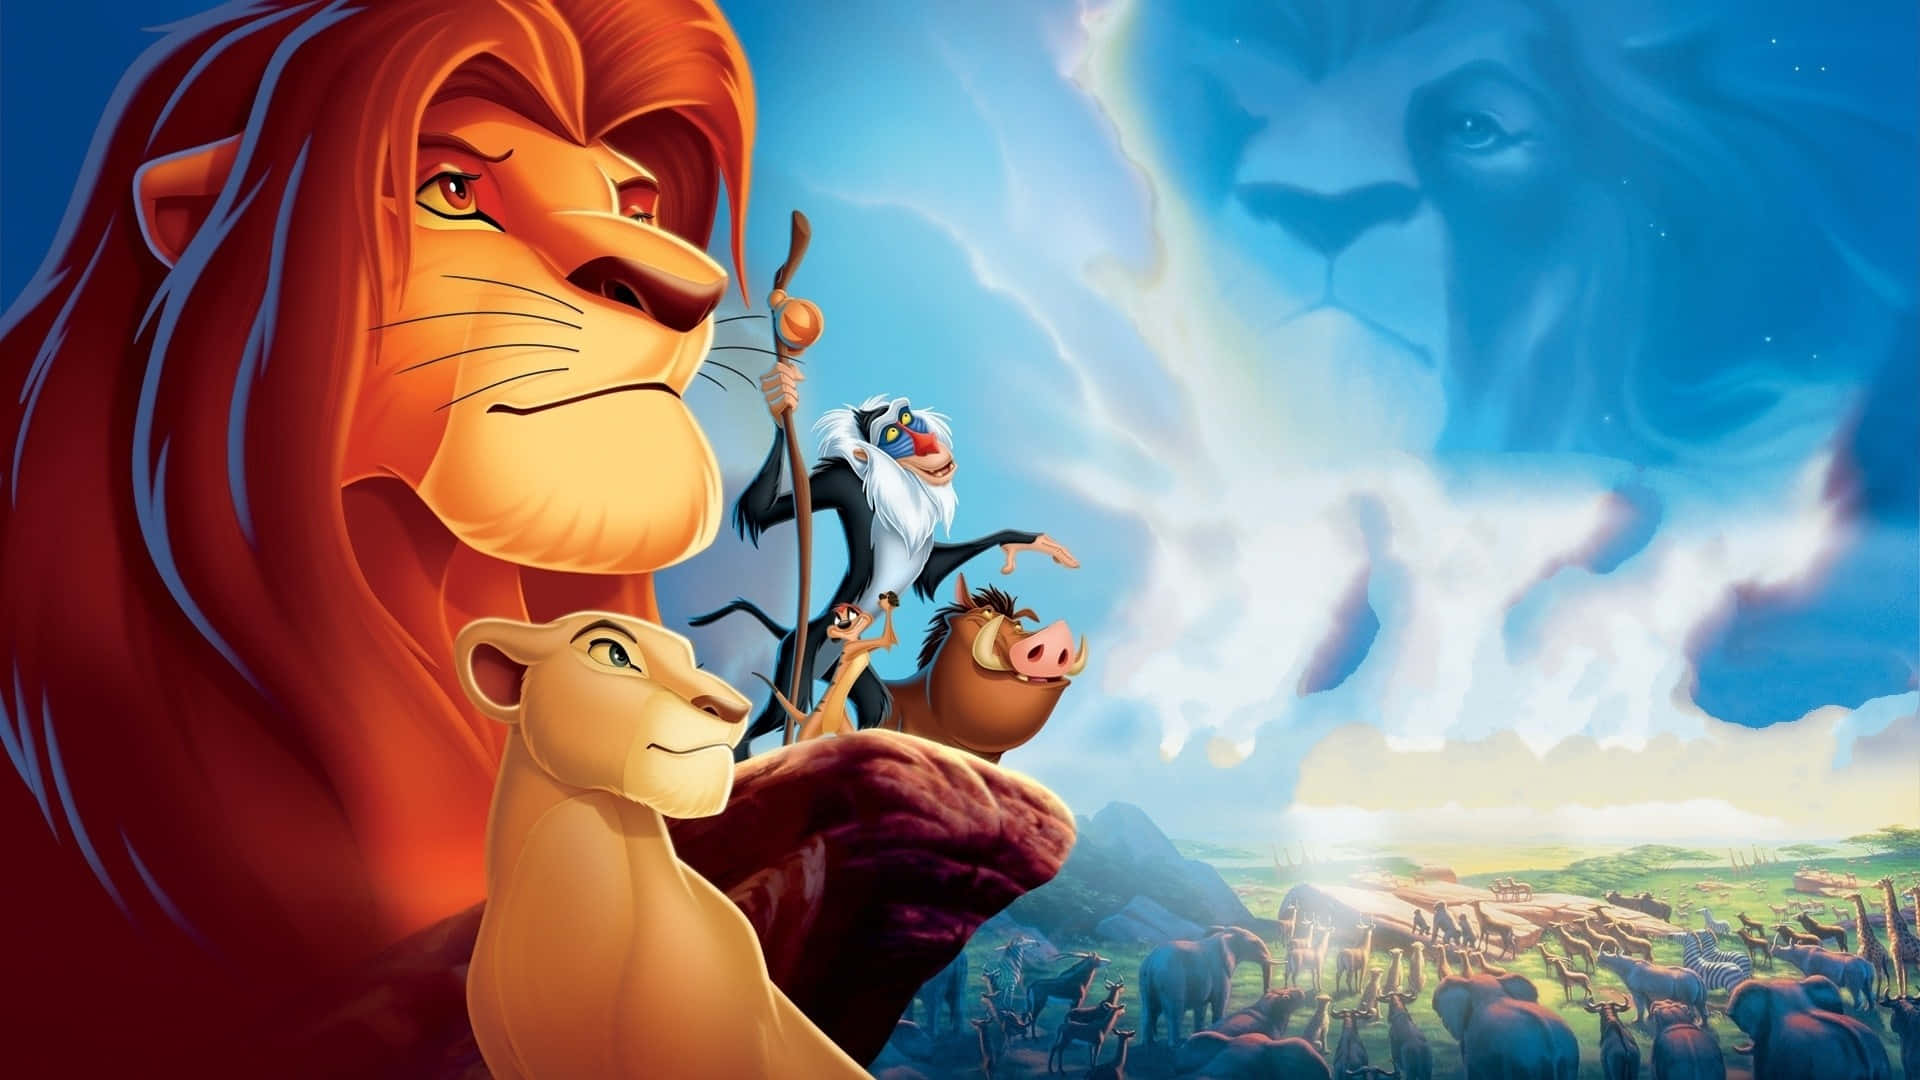 A Warm Welcome From This Cute Lion King Wallpaper